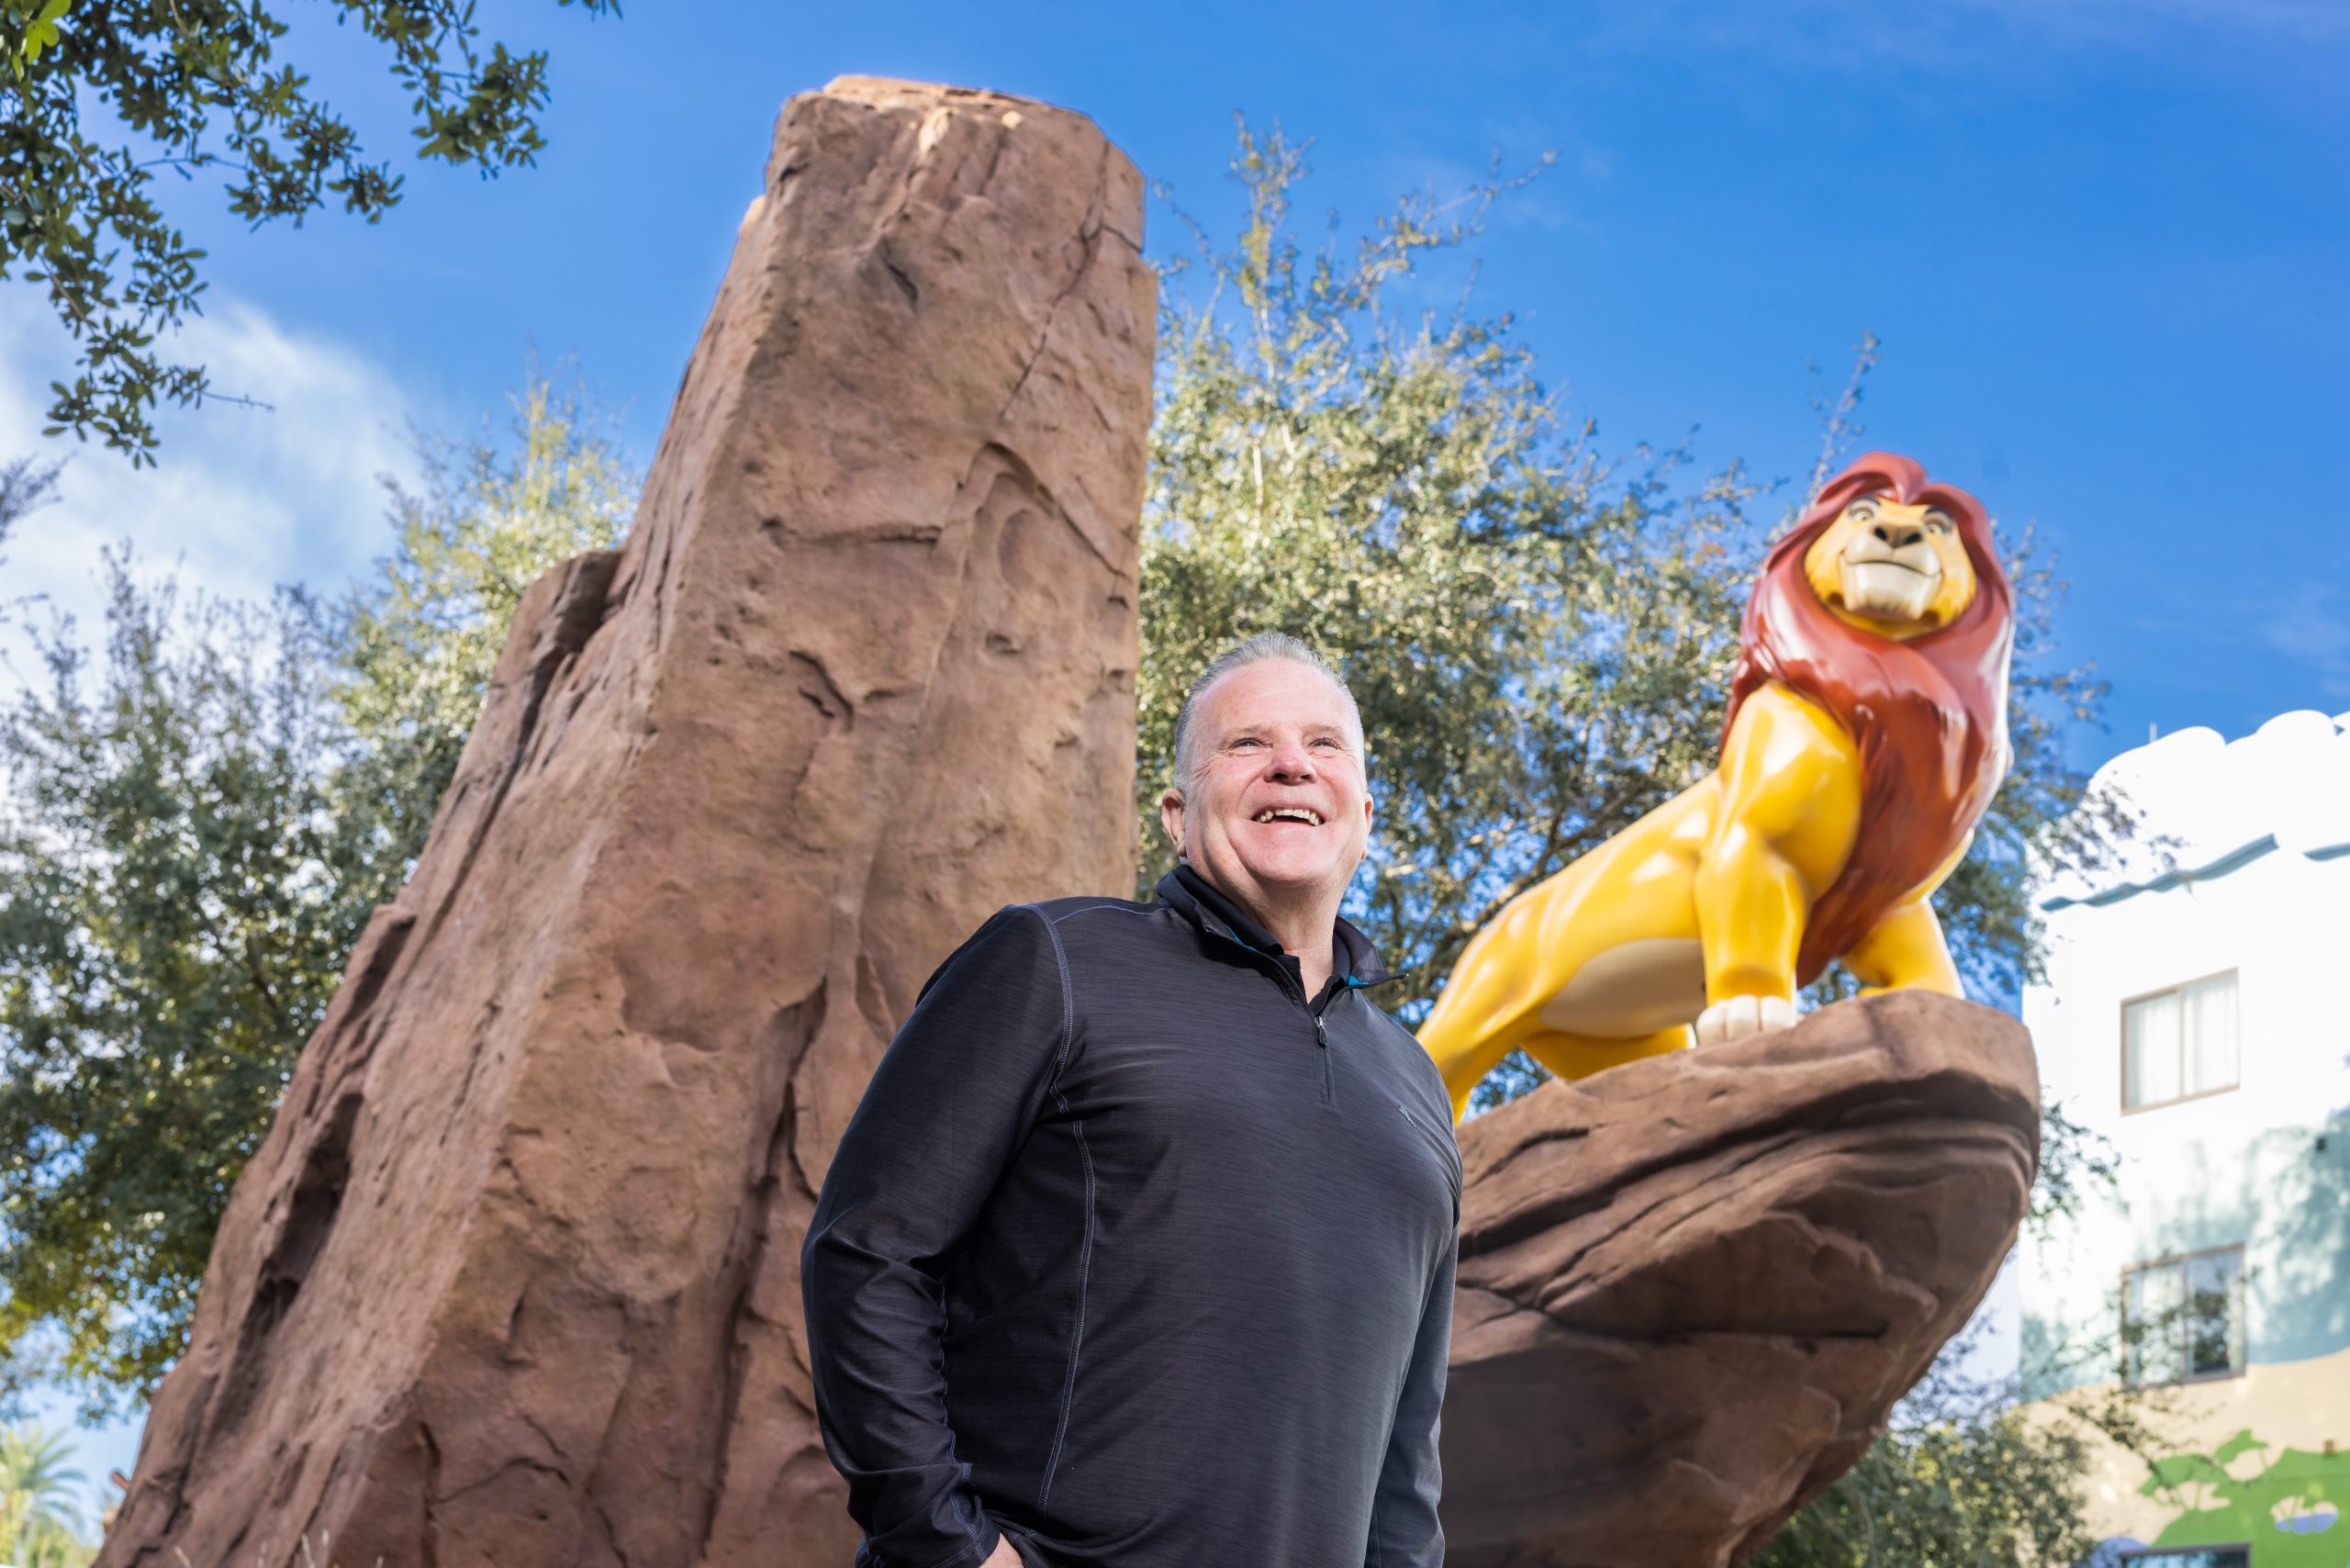 President of Intex Coating, James Delahanty stands by the Simba statue at Disney’s Art of Animation Resort